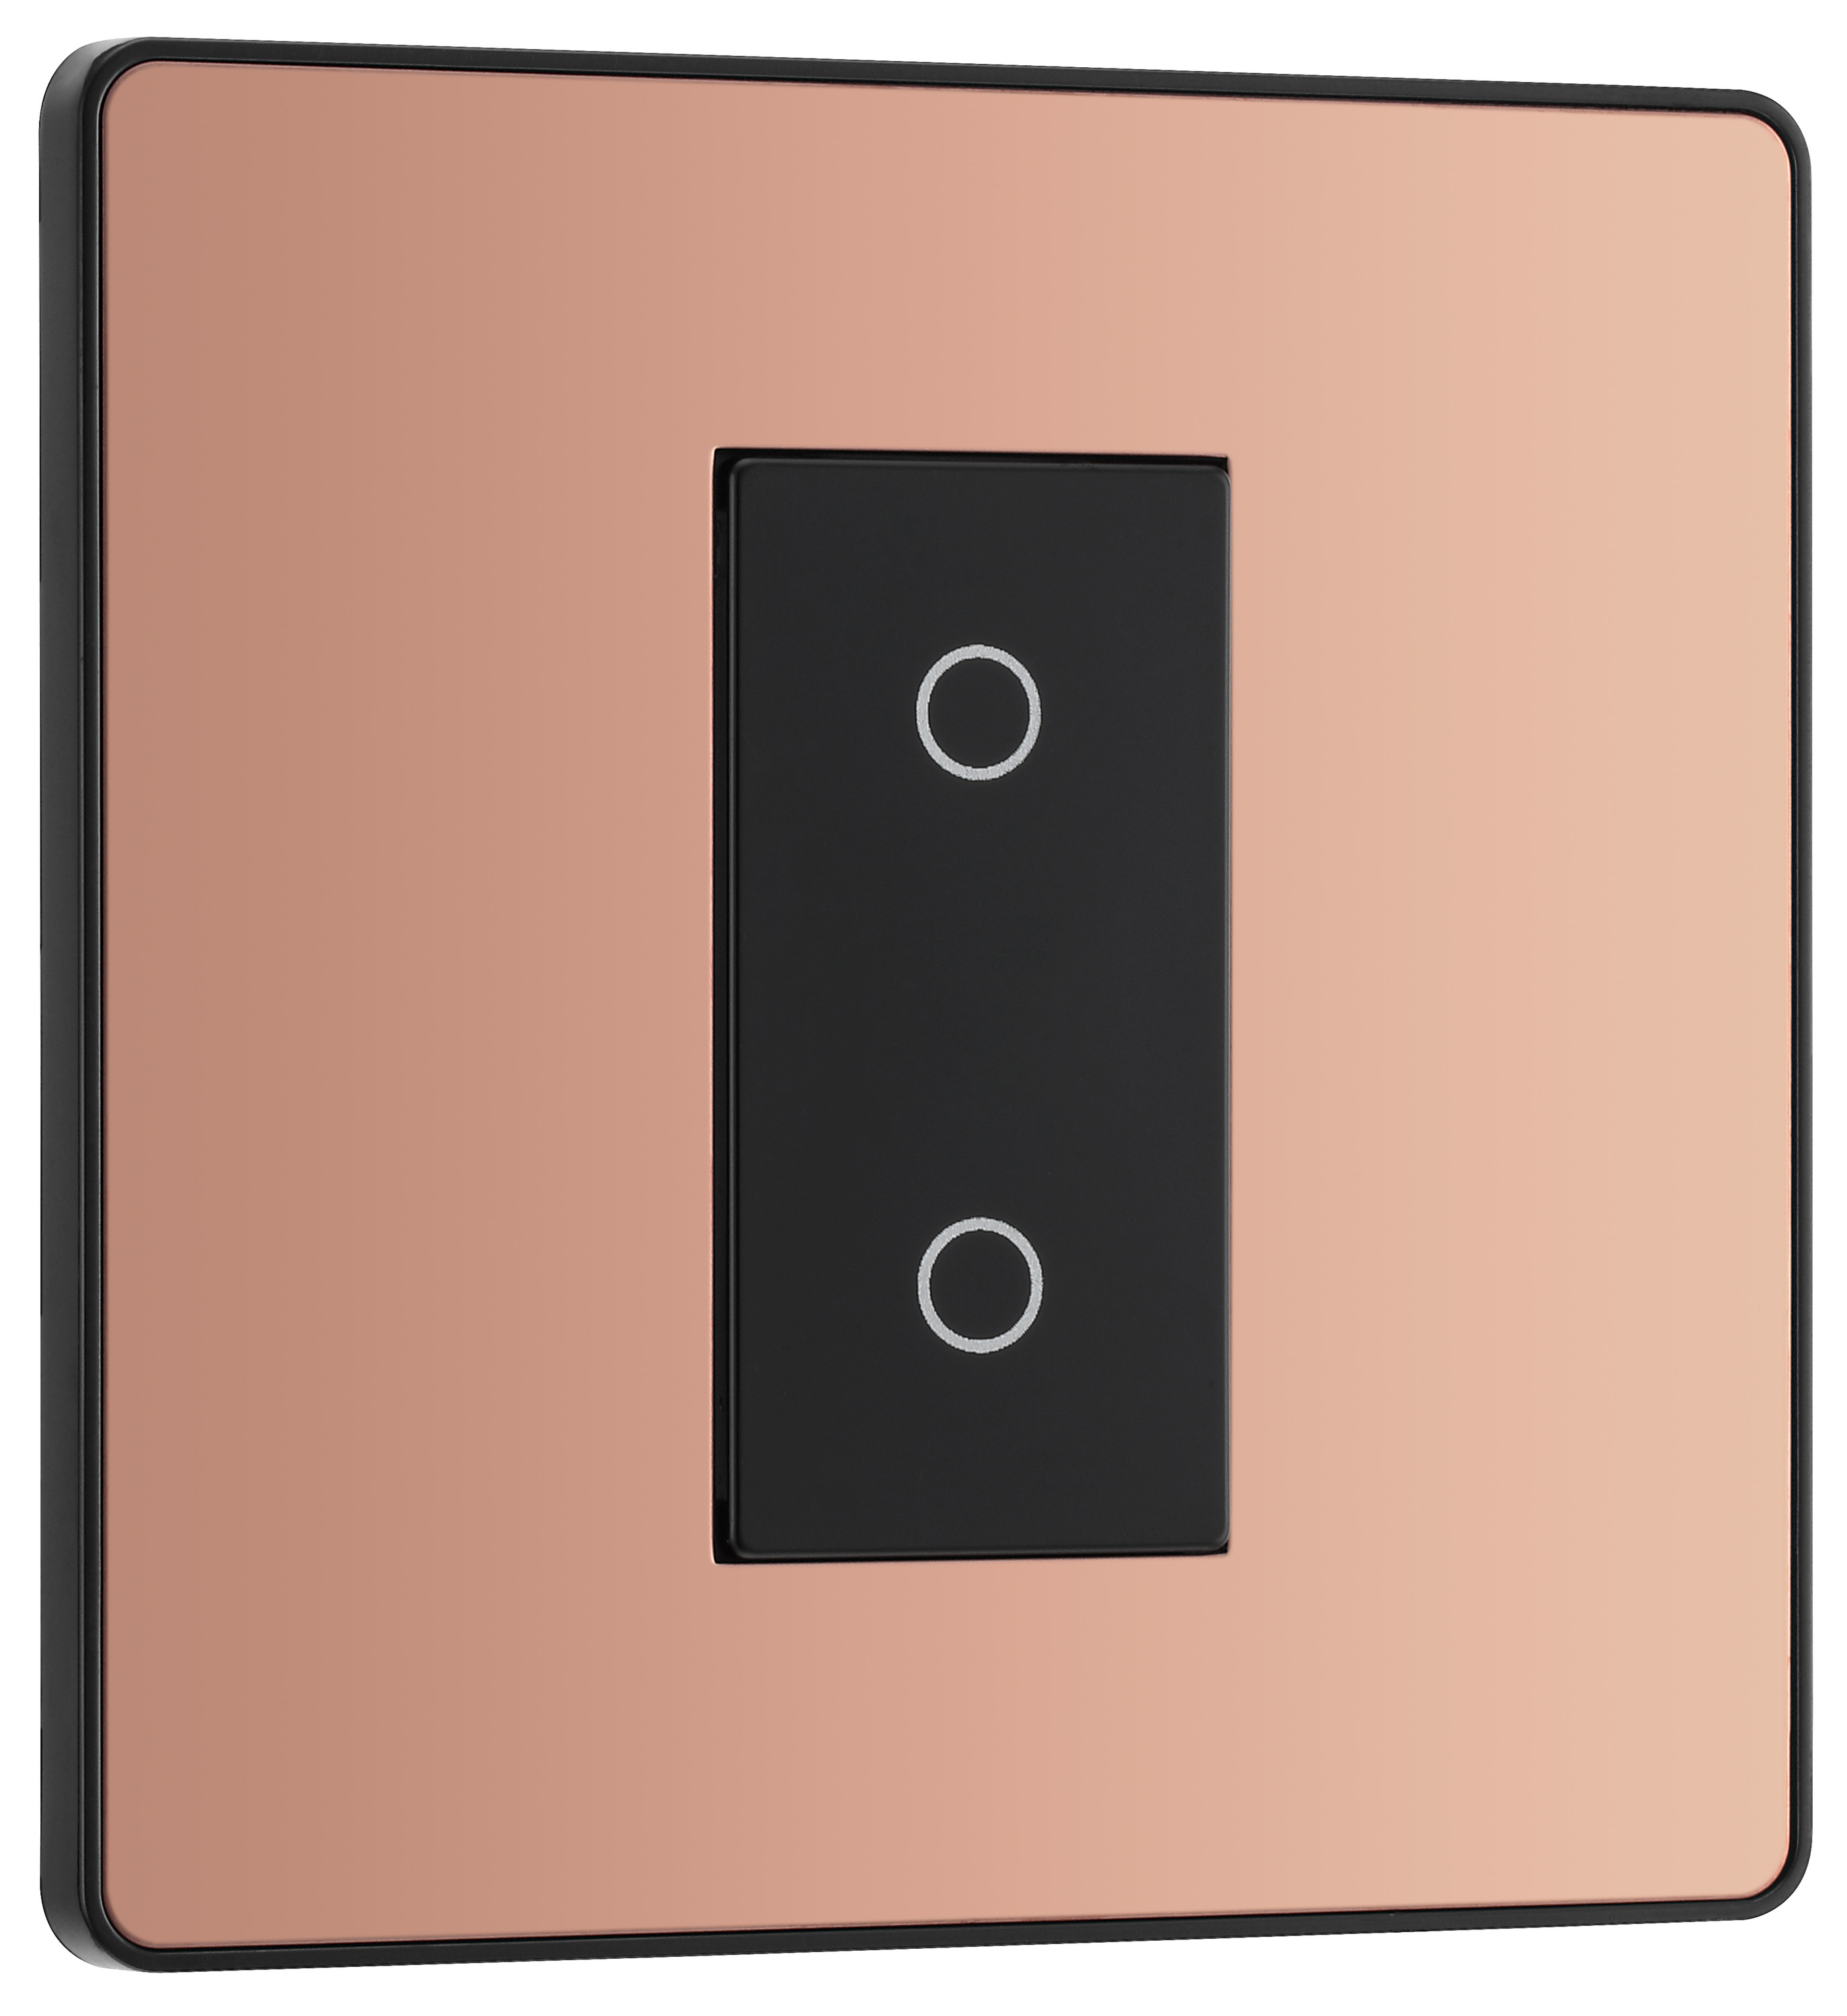 Image of BG Evolve Master Polished Copper 2 Way Single Touch Dimmer Switch - 200W